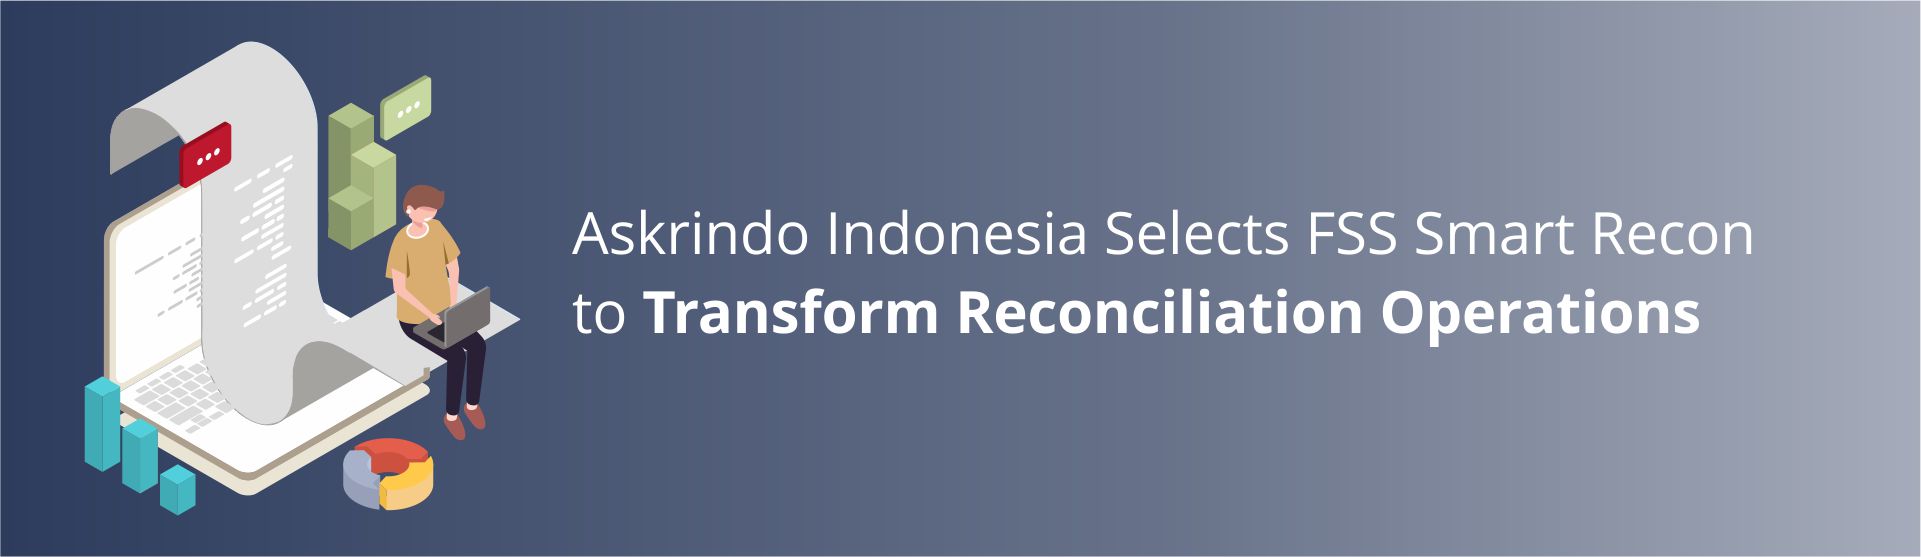 Askrindo Indonesia Selects FSS Smart Recon to Transform Reconciliation Operations